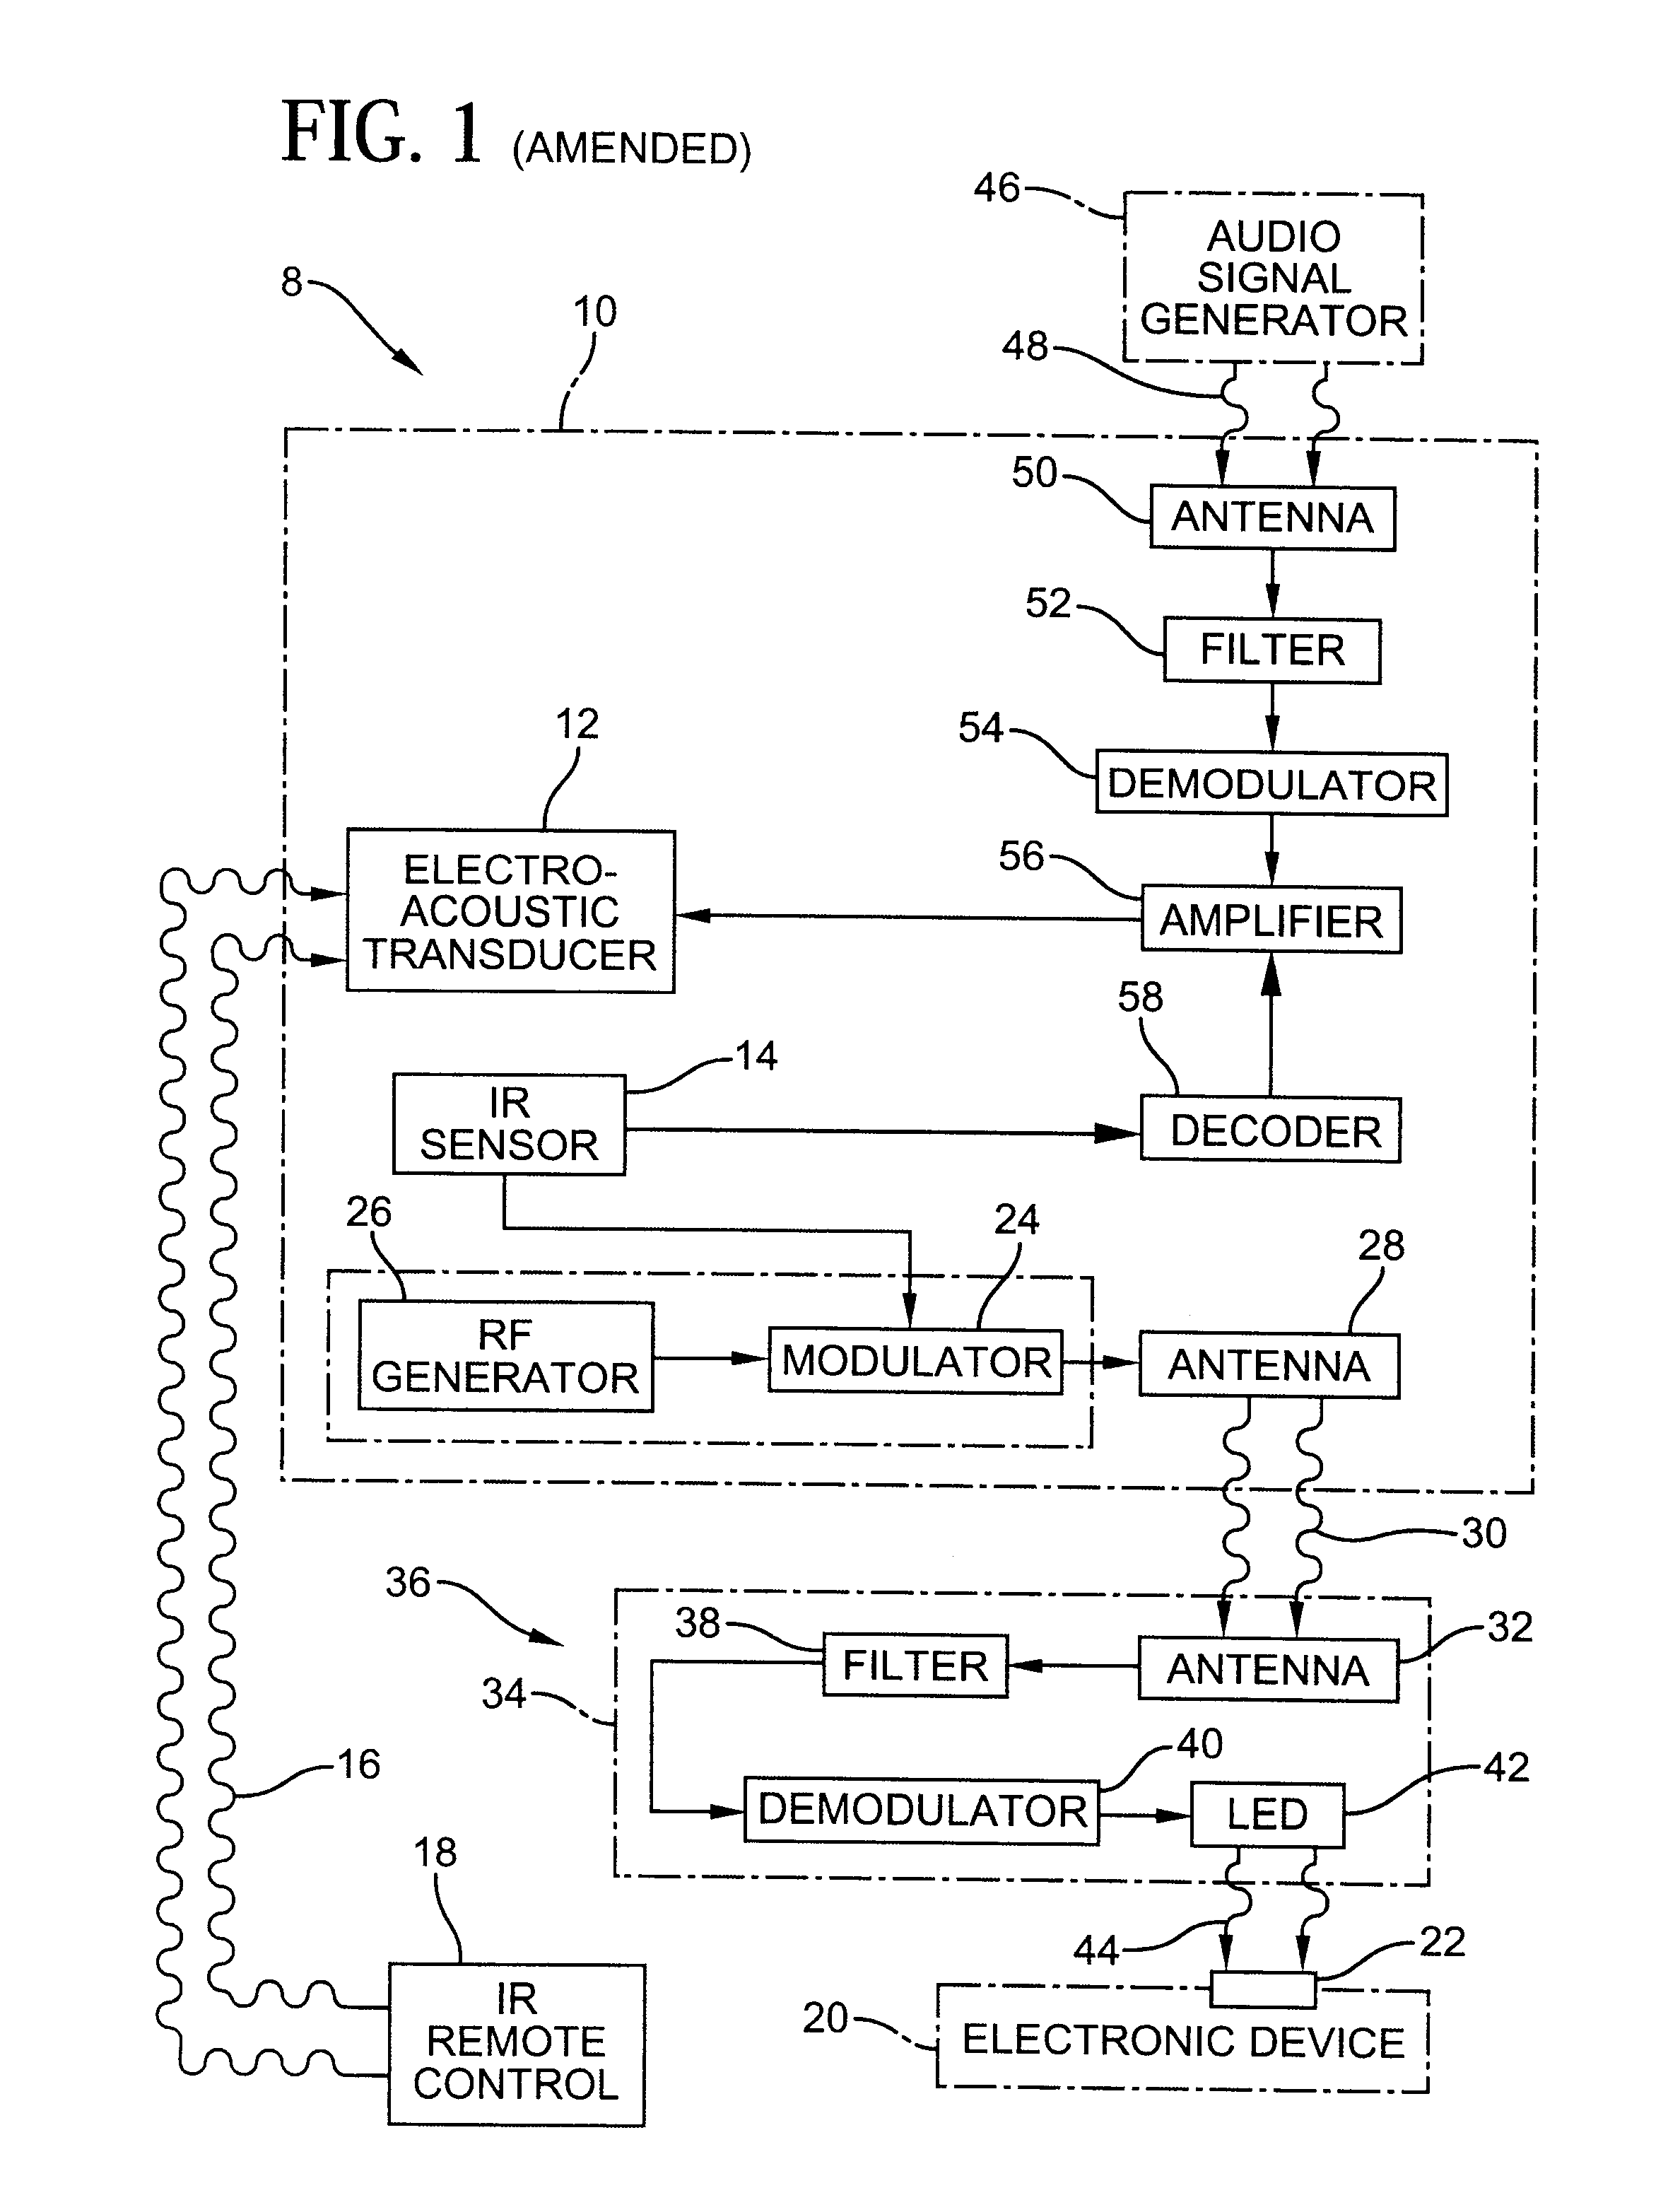 System for extending infrared remote control